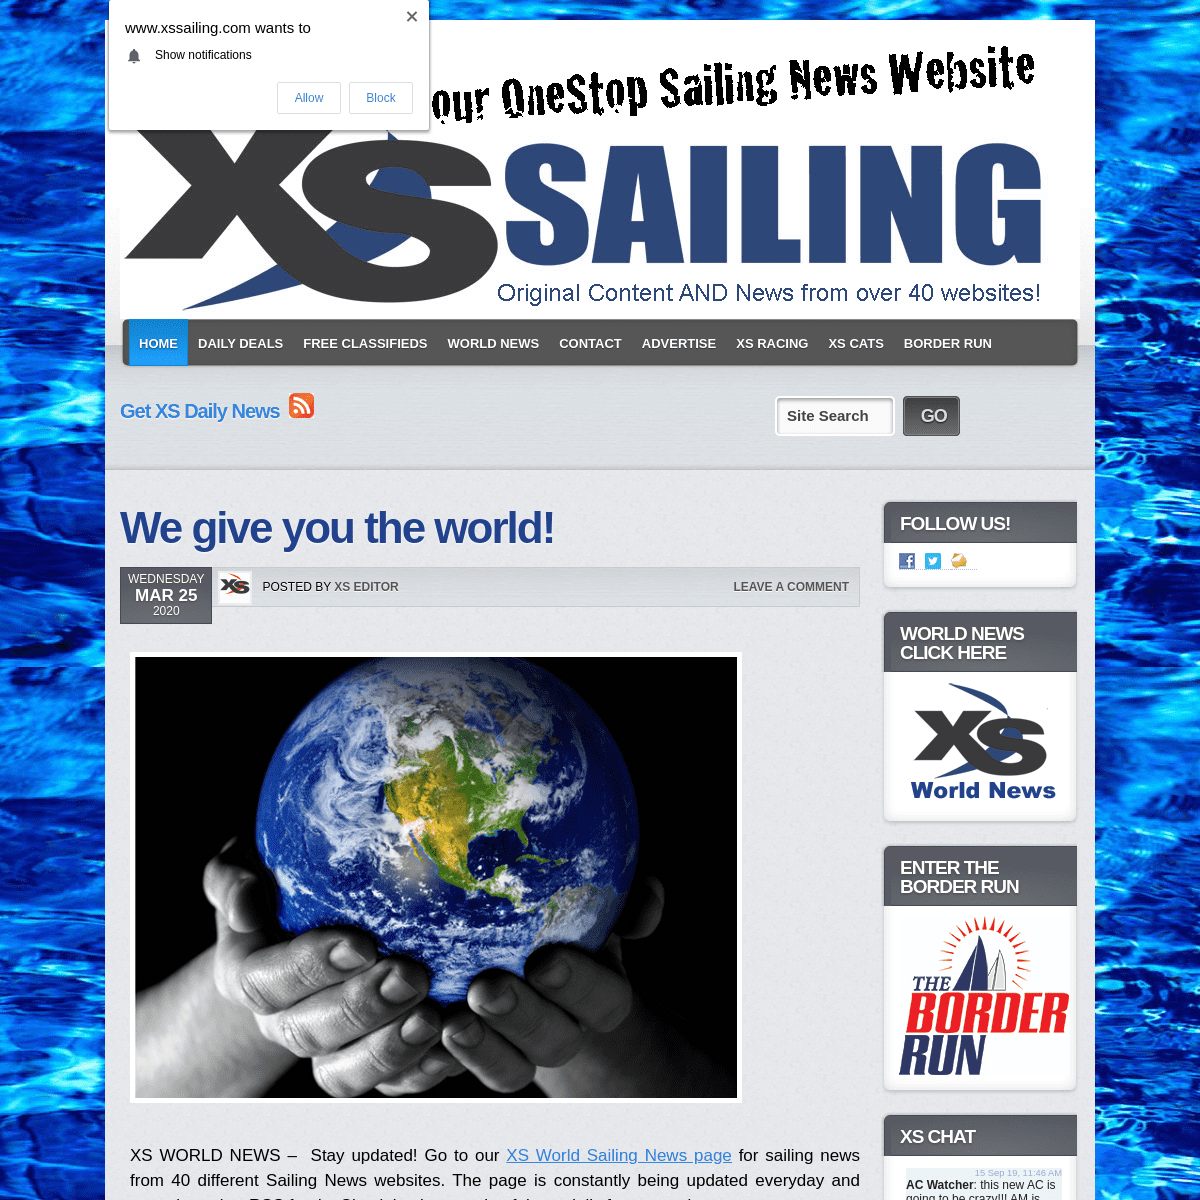 A complete backup of xssailing.com